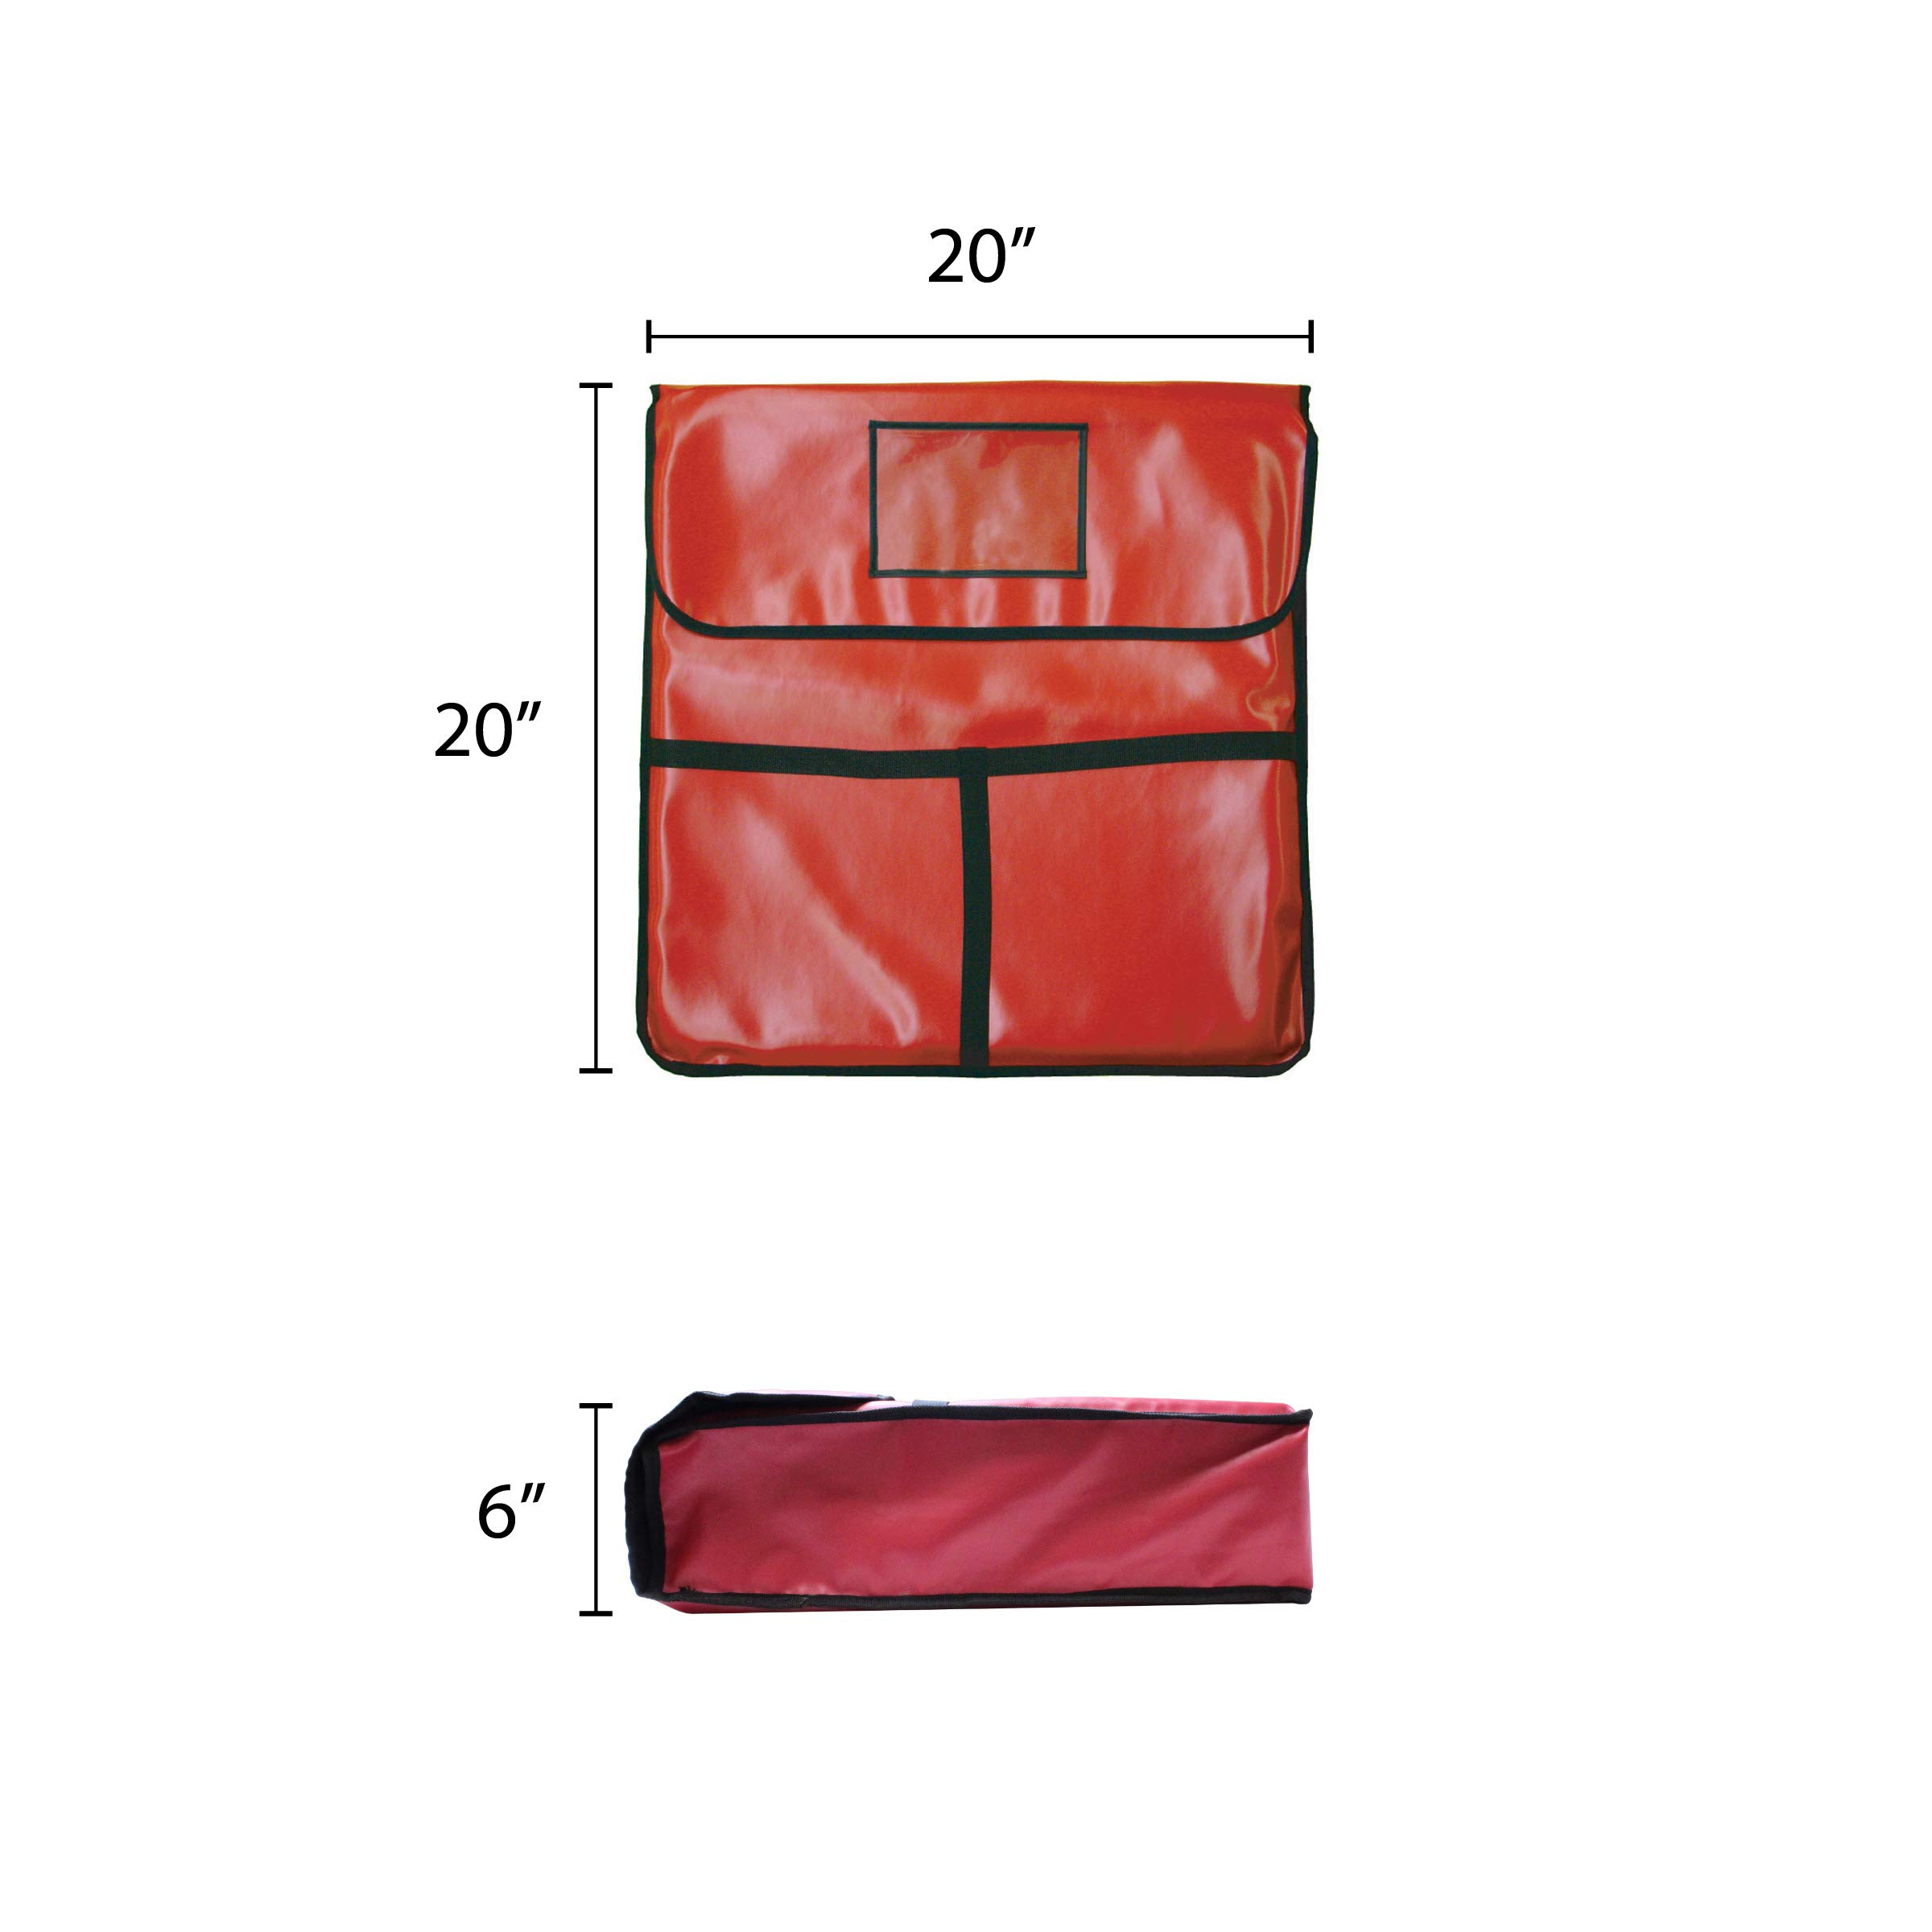 Thunder Group 20 x 20 Inch Pizza Bag holds 2 x 18 Inch Pizza